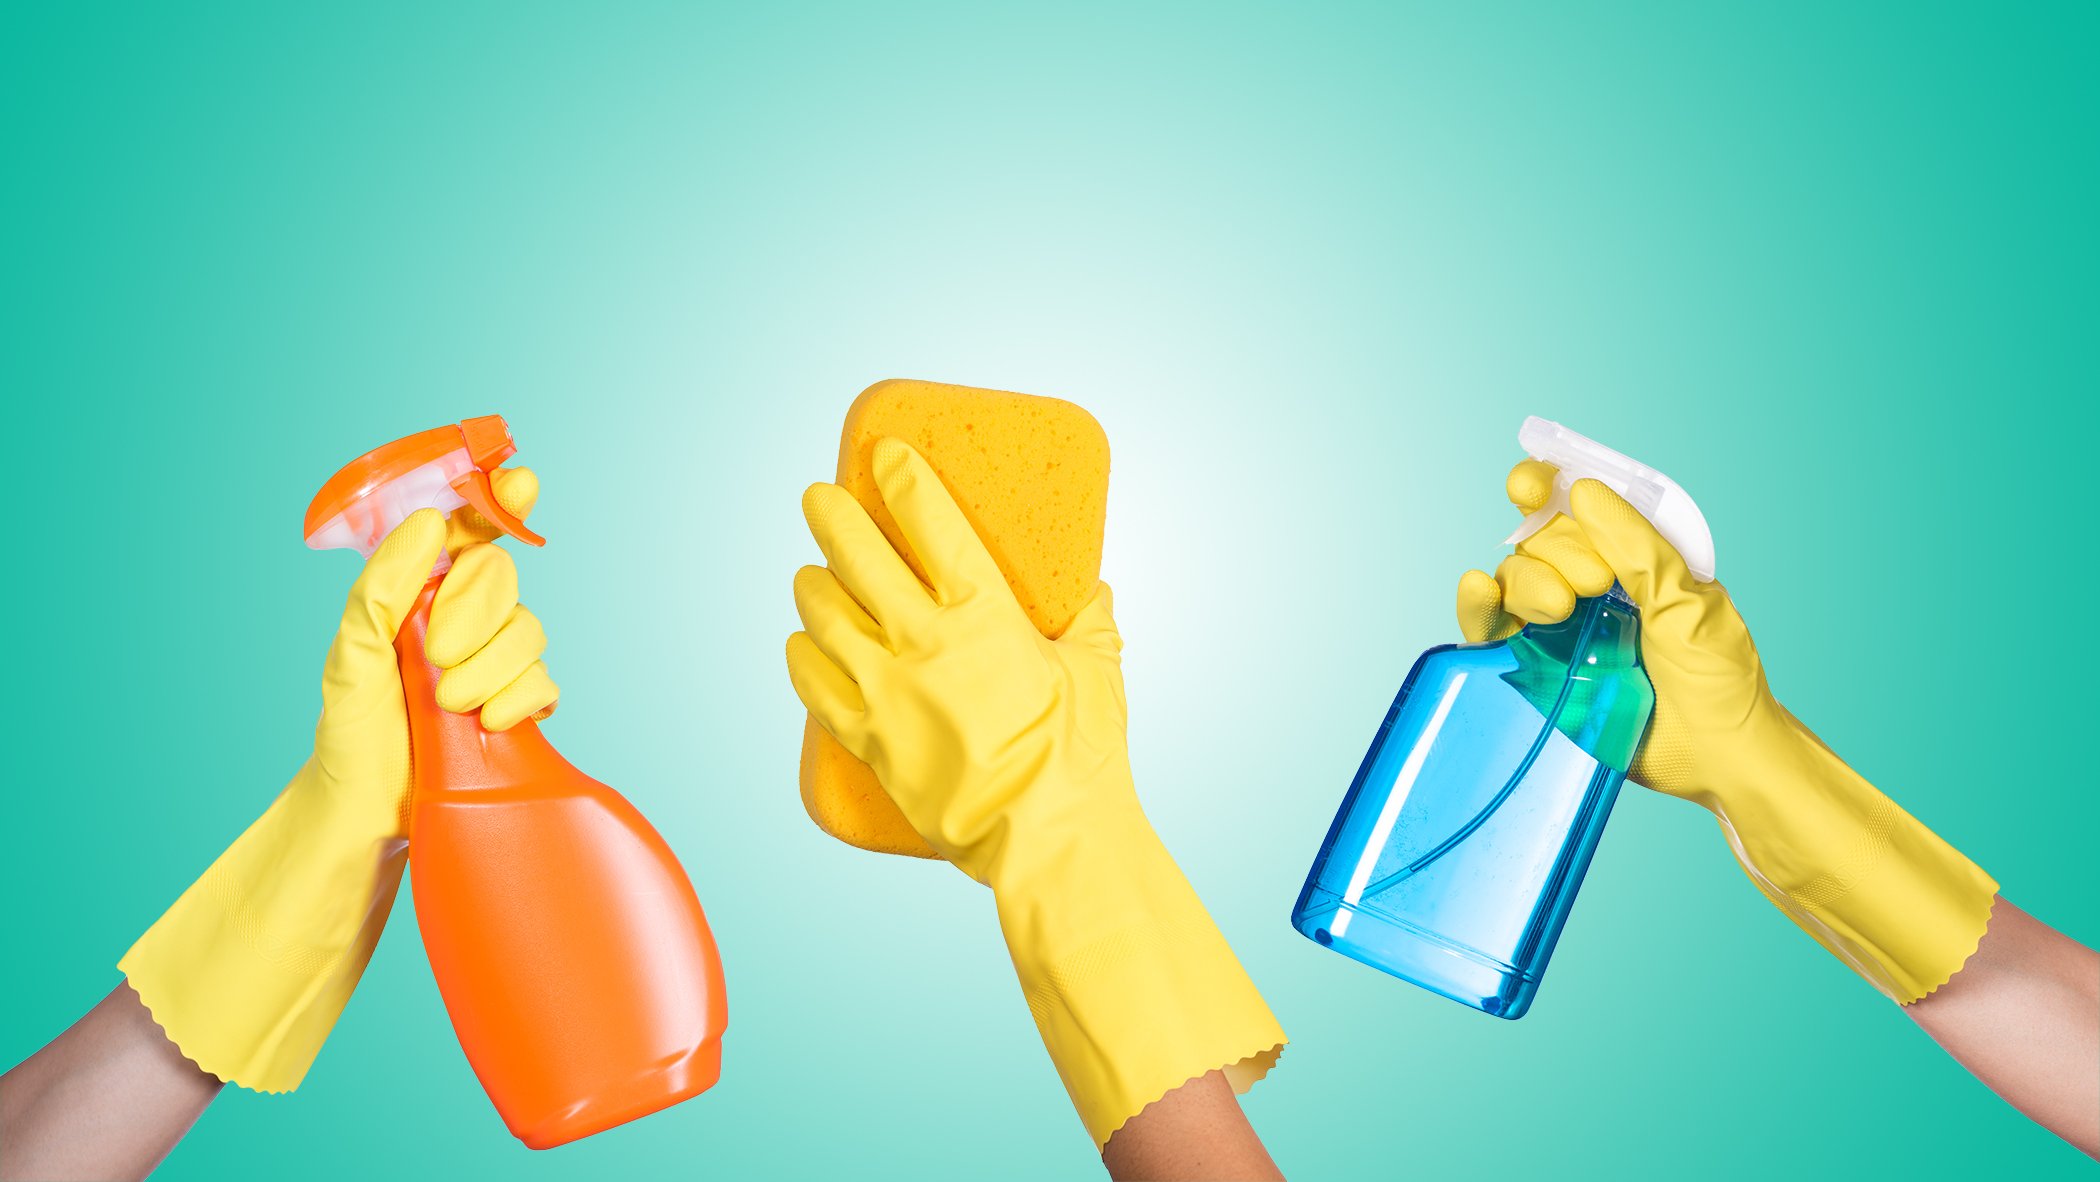 https://img.money.com/2017/06/170609-housecleaners-cleaning-products.jpg?crop=0px%2C131px%2C2100px%2C1182px&quality=85